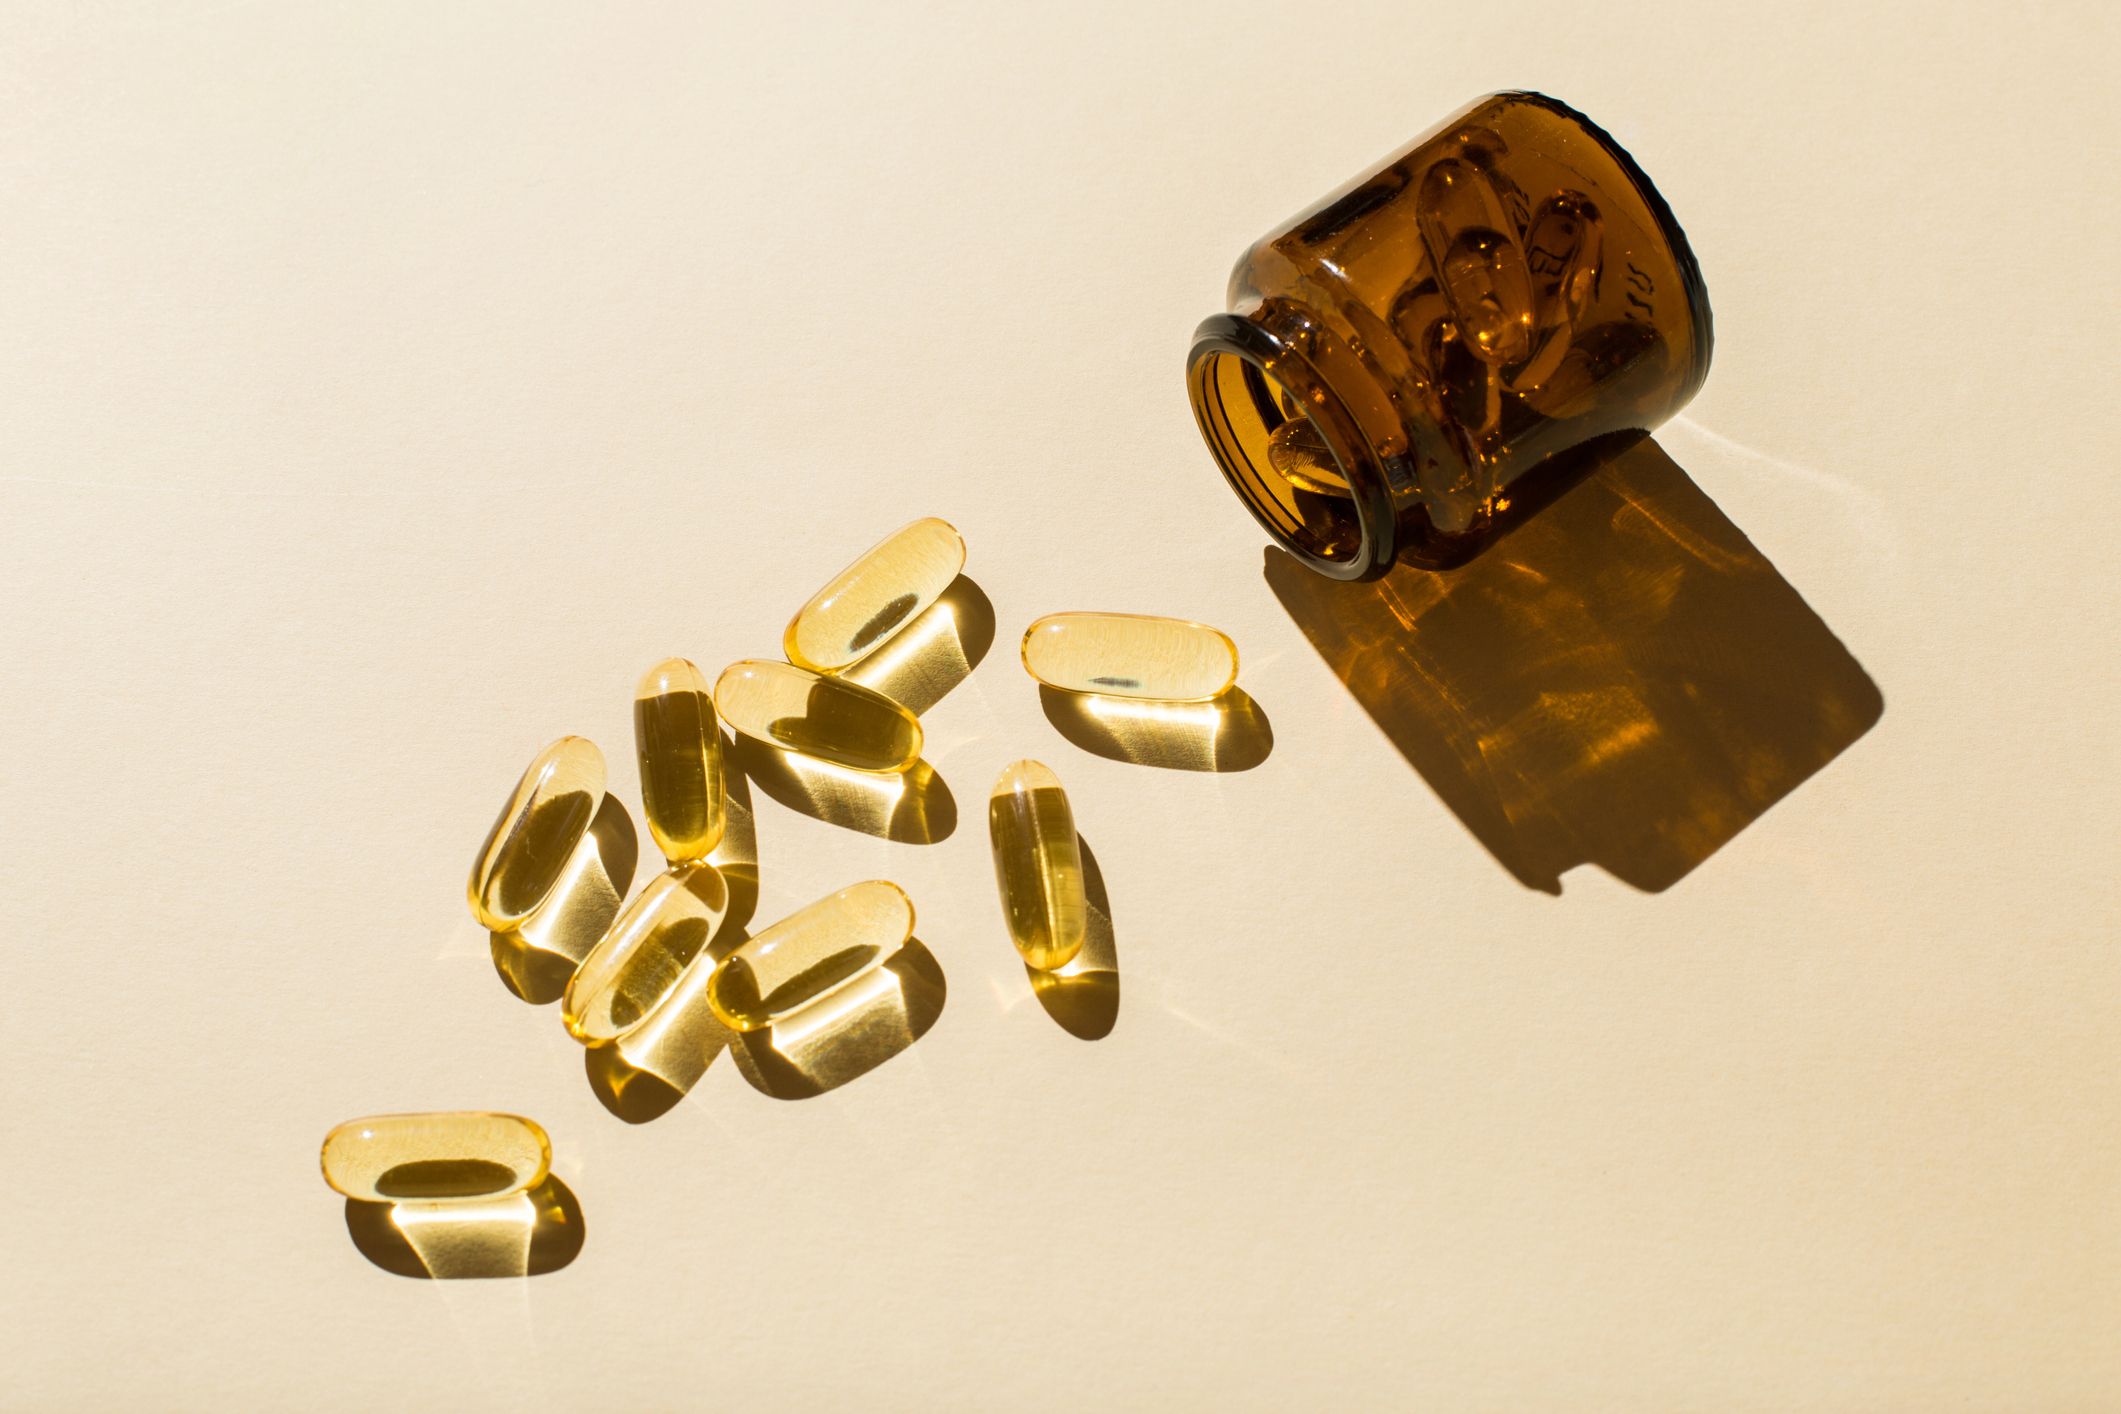 Omega-3 Foods & Fish Oil During Pregnancy: Should You Take a Supplement?